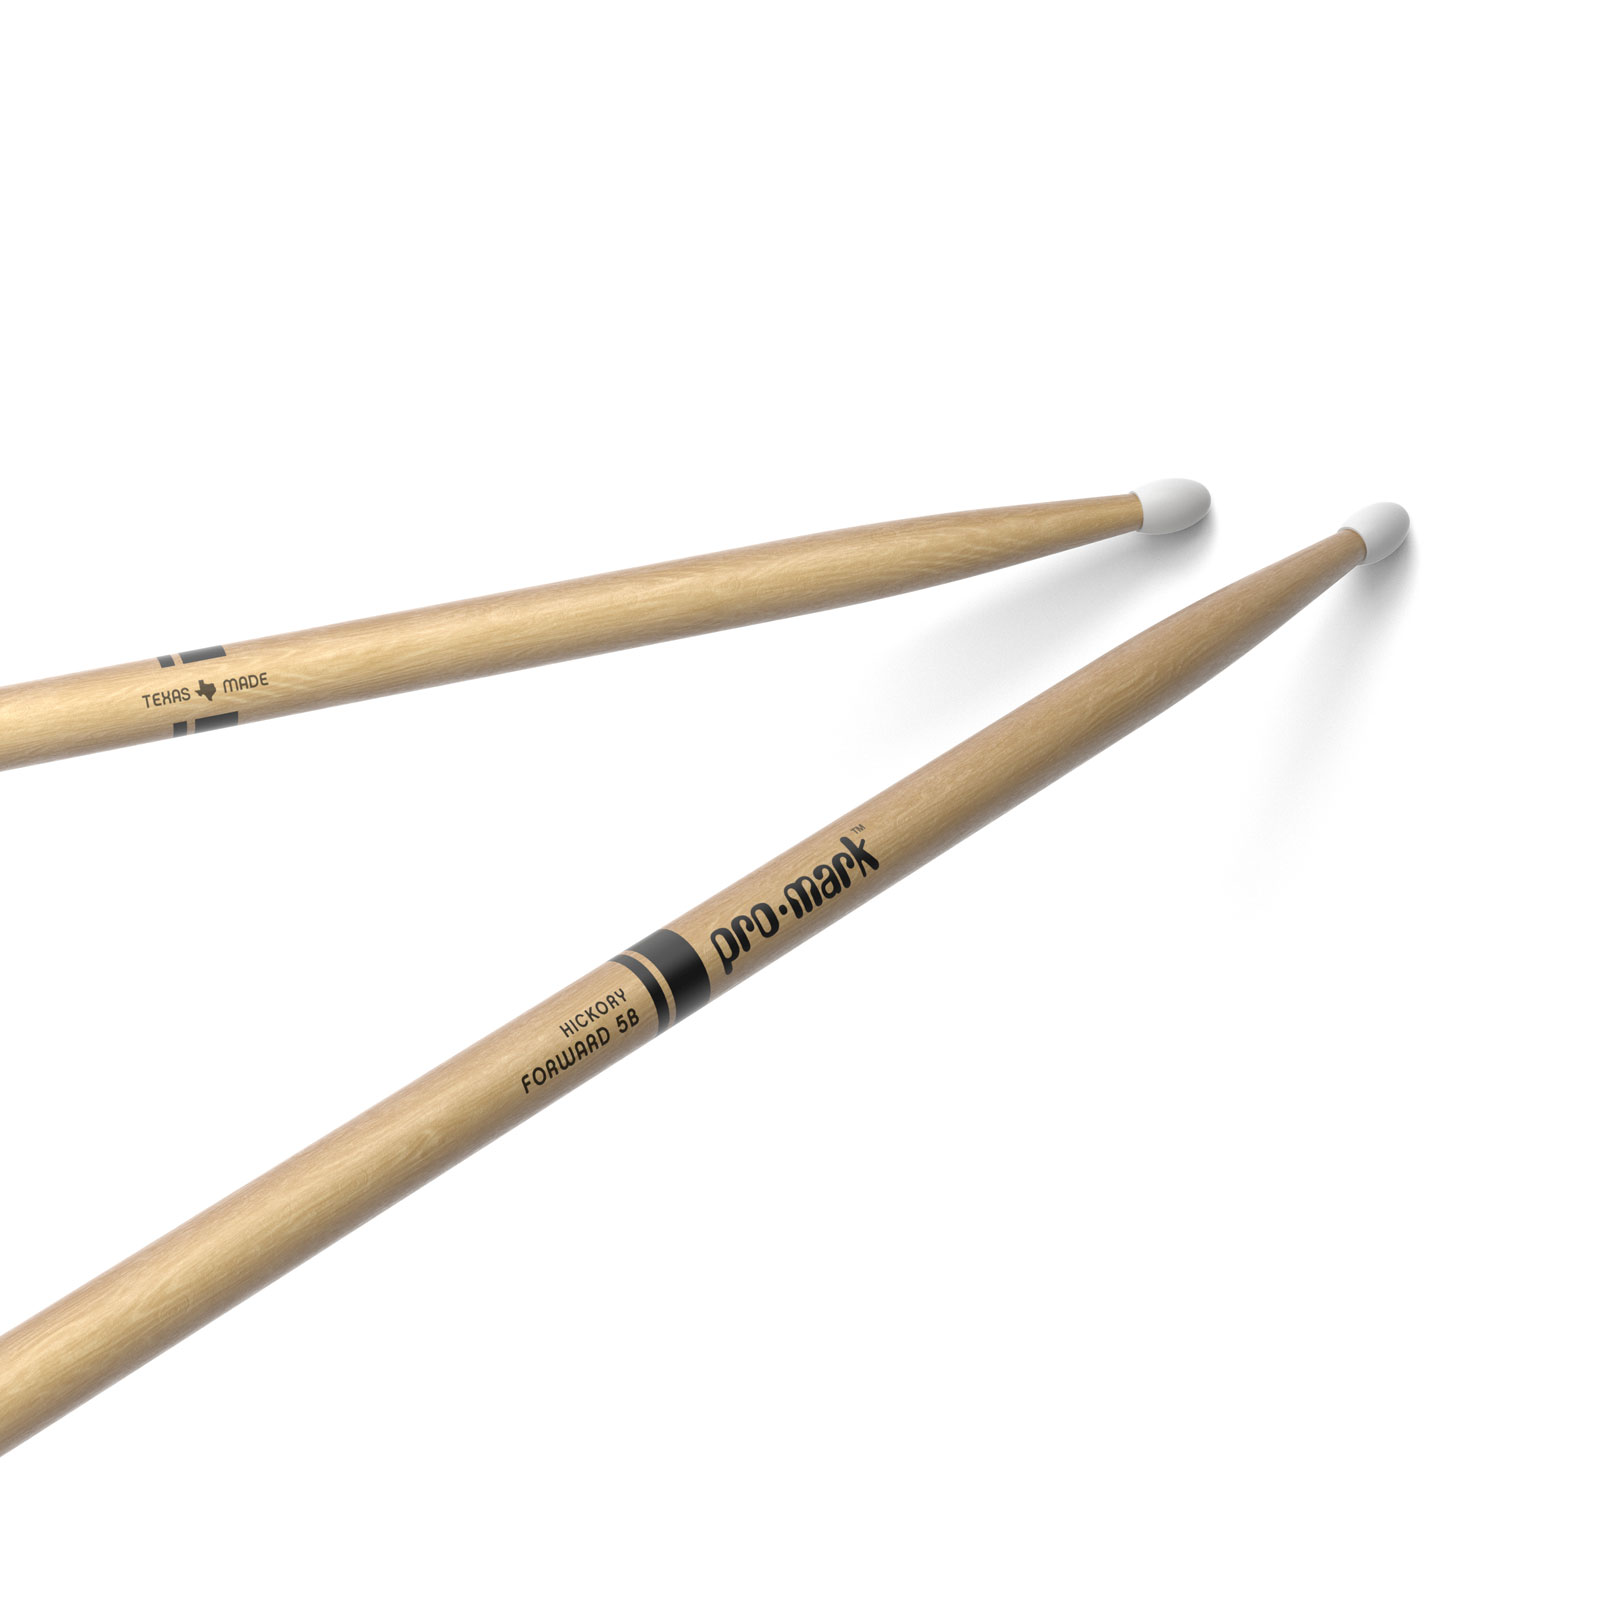 PRO MARK CLASSIC FORWARD 5B HICKORY DRUMSTICK OVAL NYLON TIP